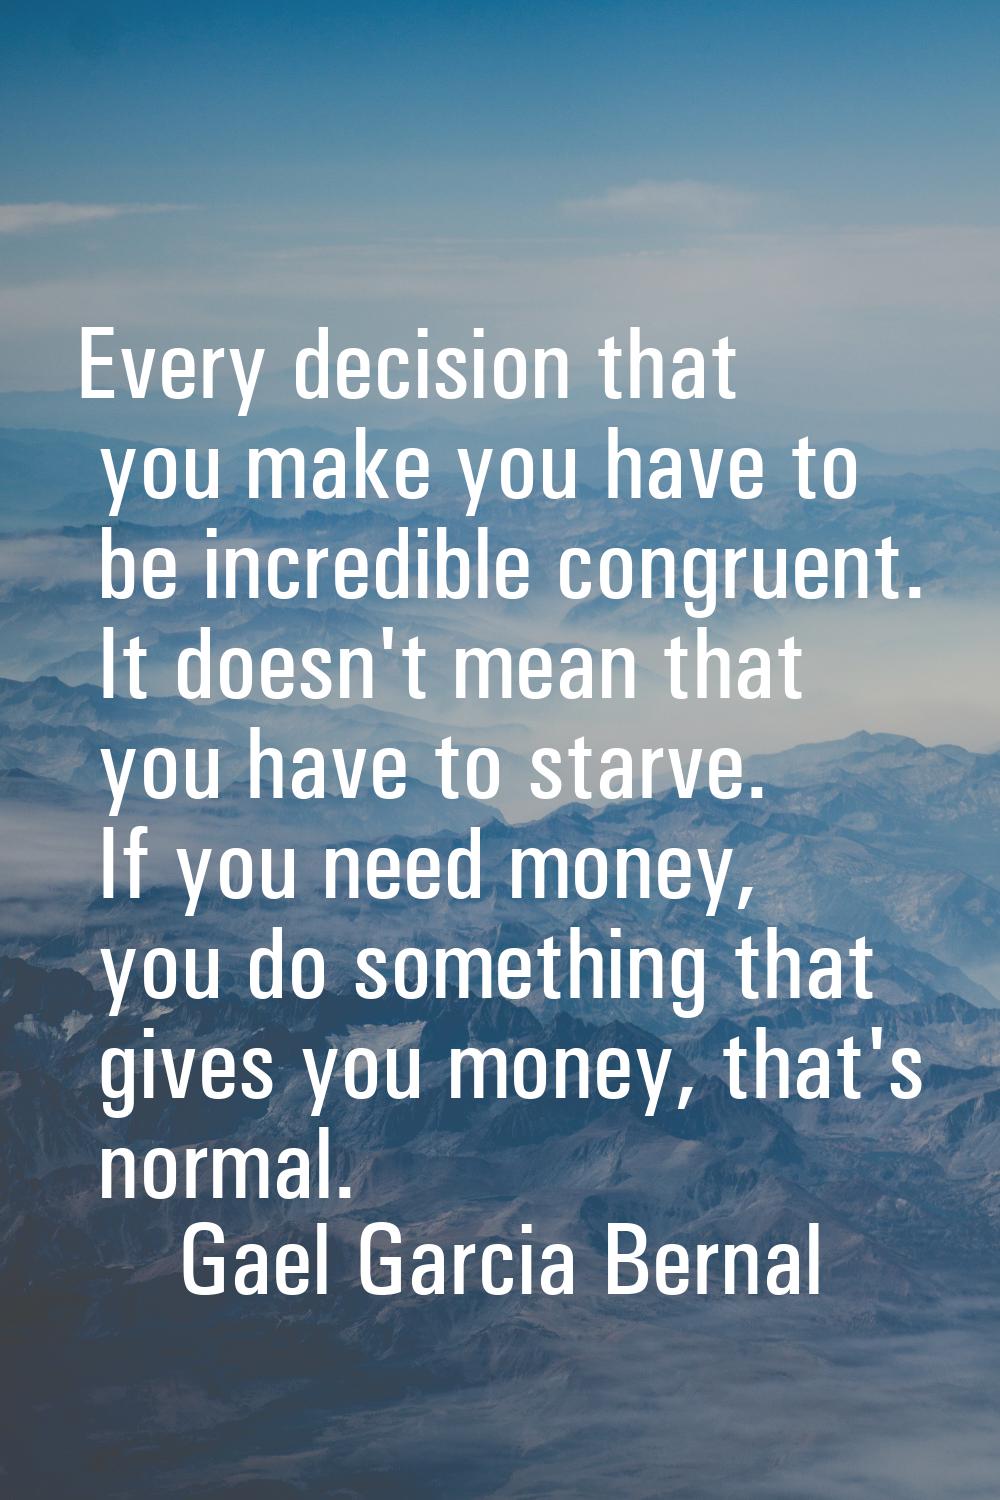 Every decision that you make you have to be incredible congruent. It doesn't mean that you have to 